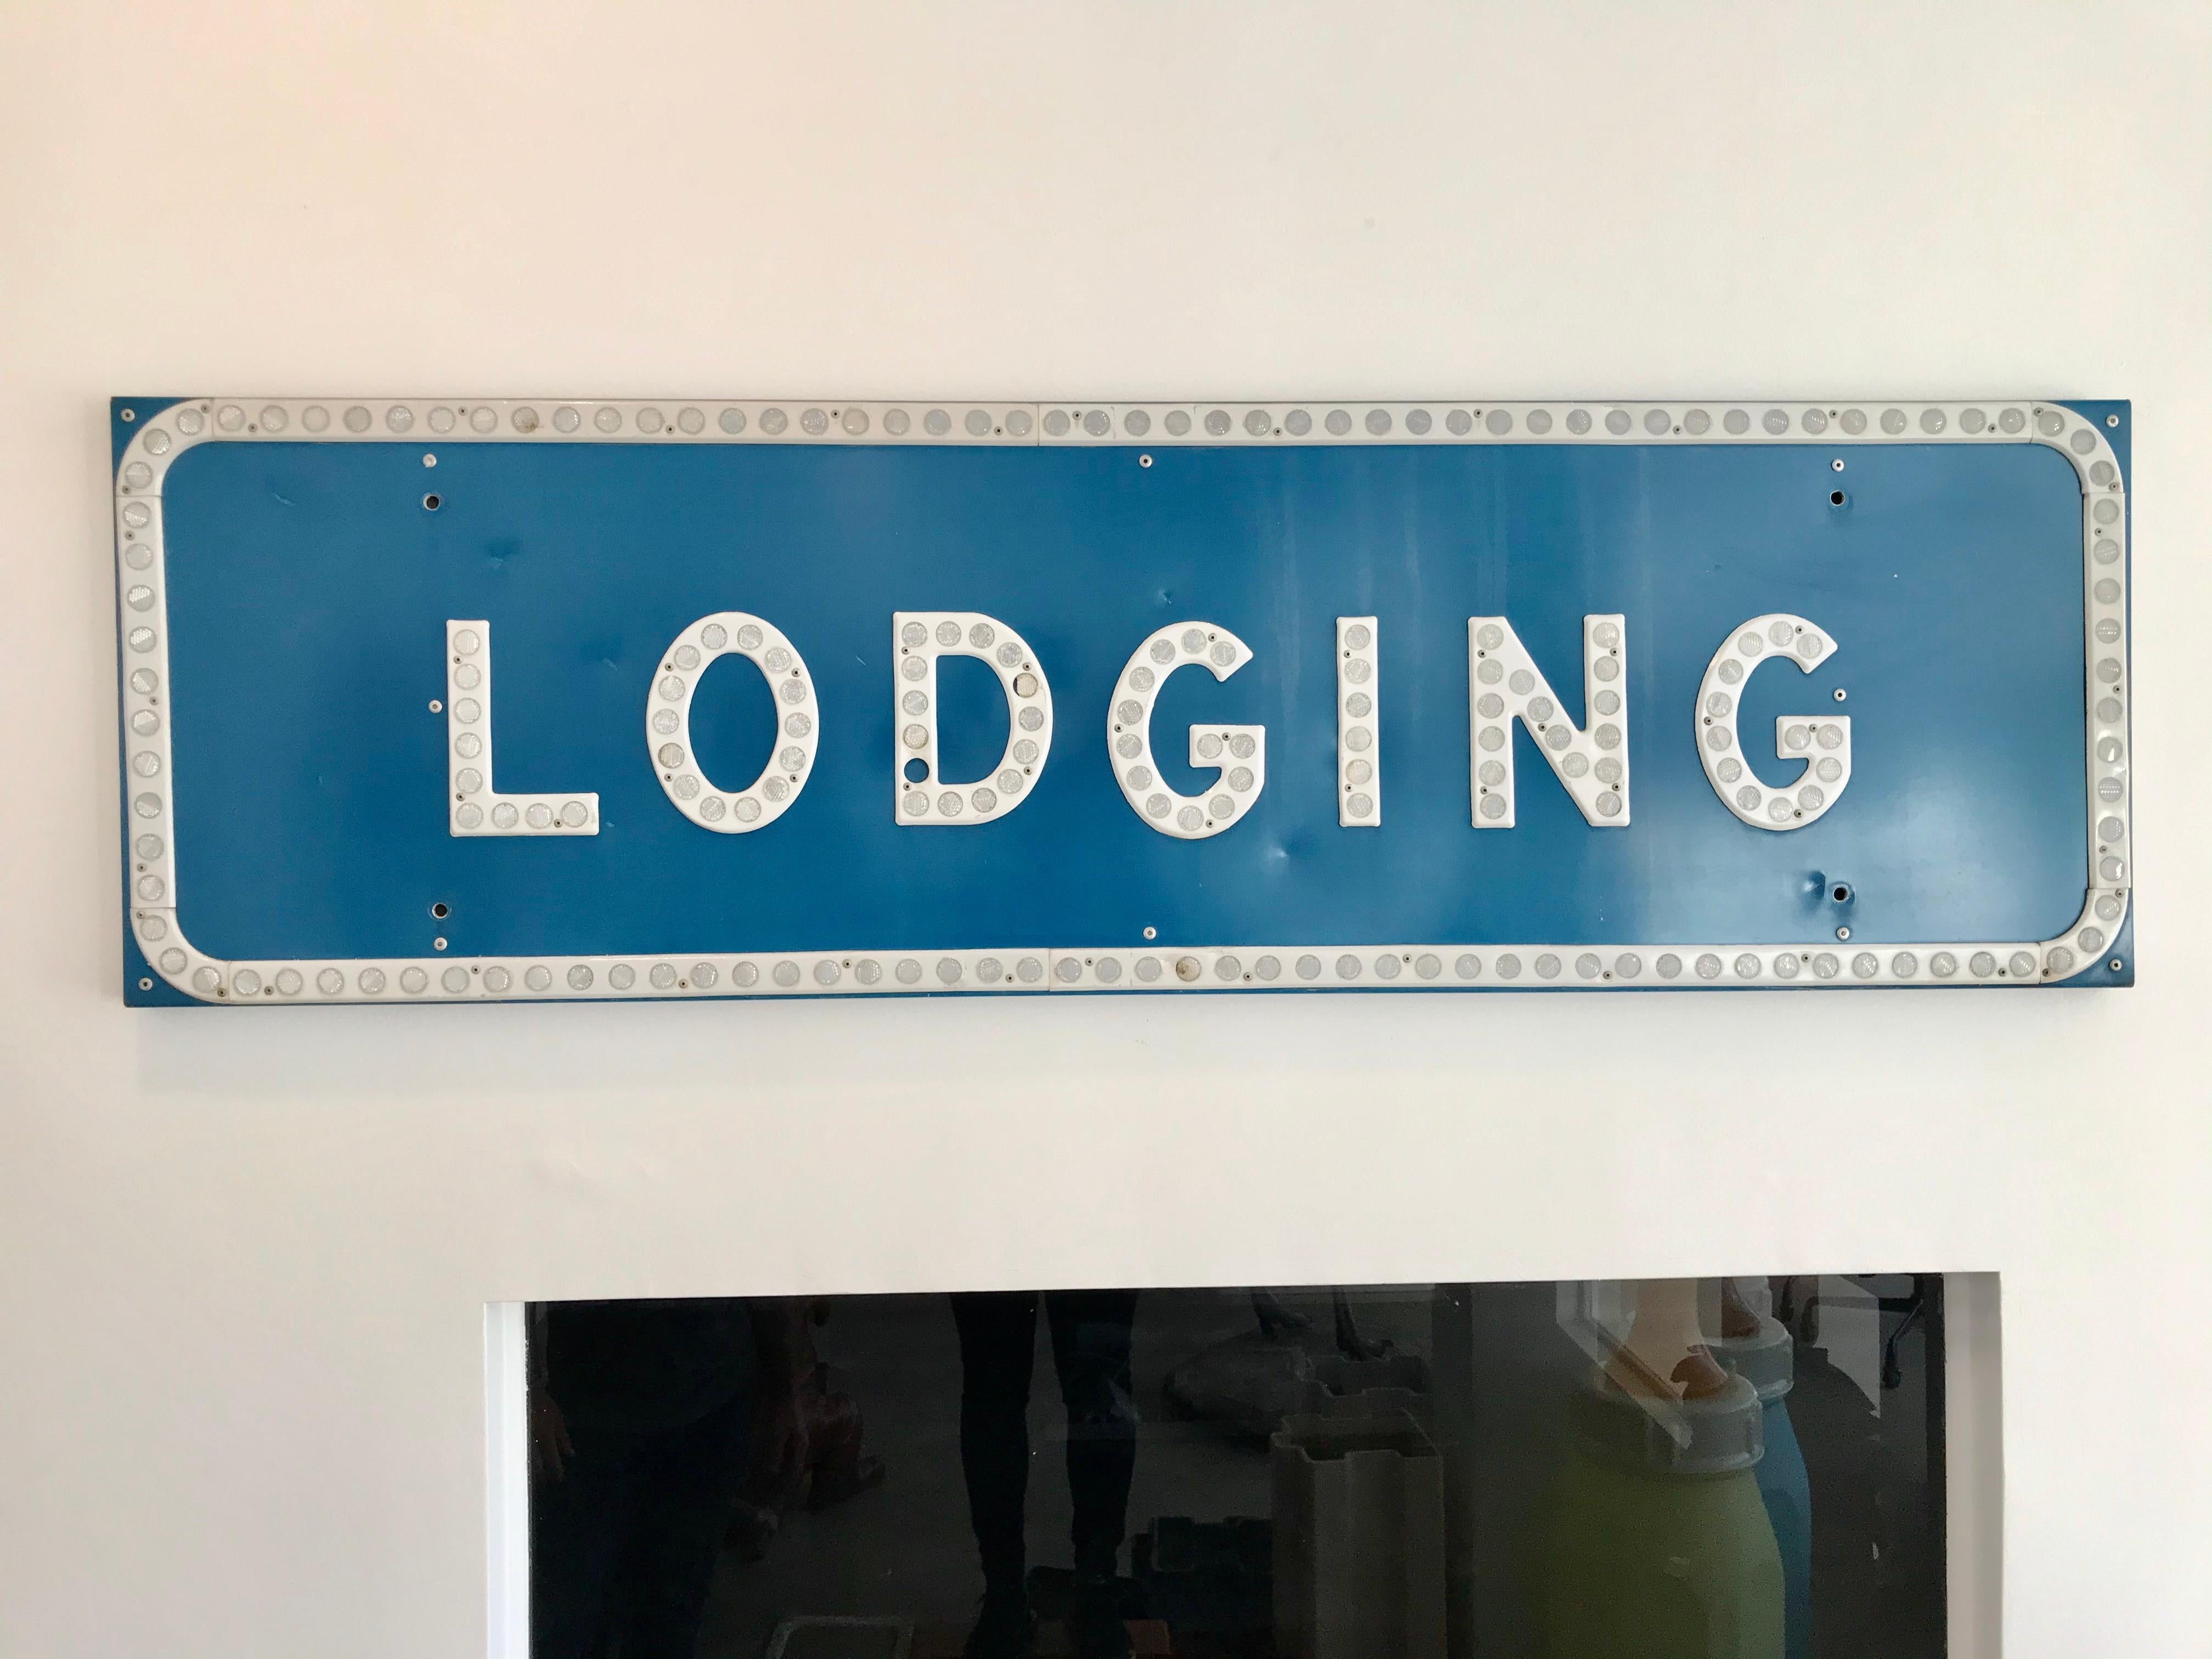 Massive vintage California lodging sign. Large blue sign with white lettering and white trim. Letters and trim have reflective pieces. Great coloring and condition. Fantastic piece of west coast ephemera. Backside is stamped 